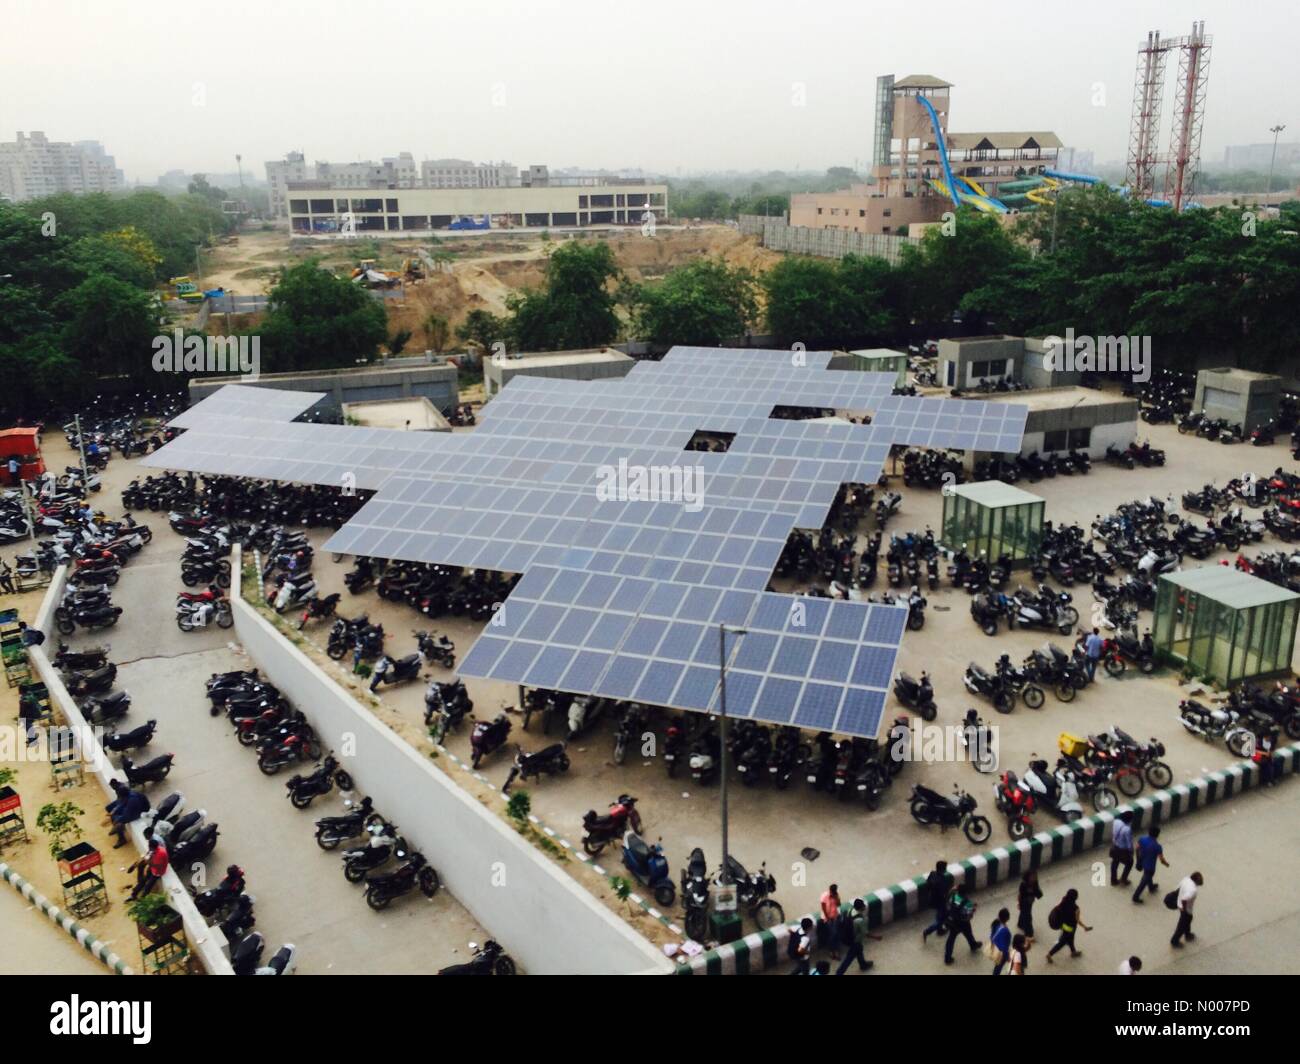 Solar panel over the parking of HUDA city centre metro station installed by Indian Government to produce electricity. Stock Photo